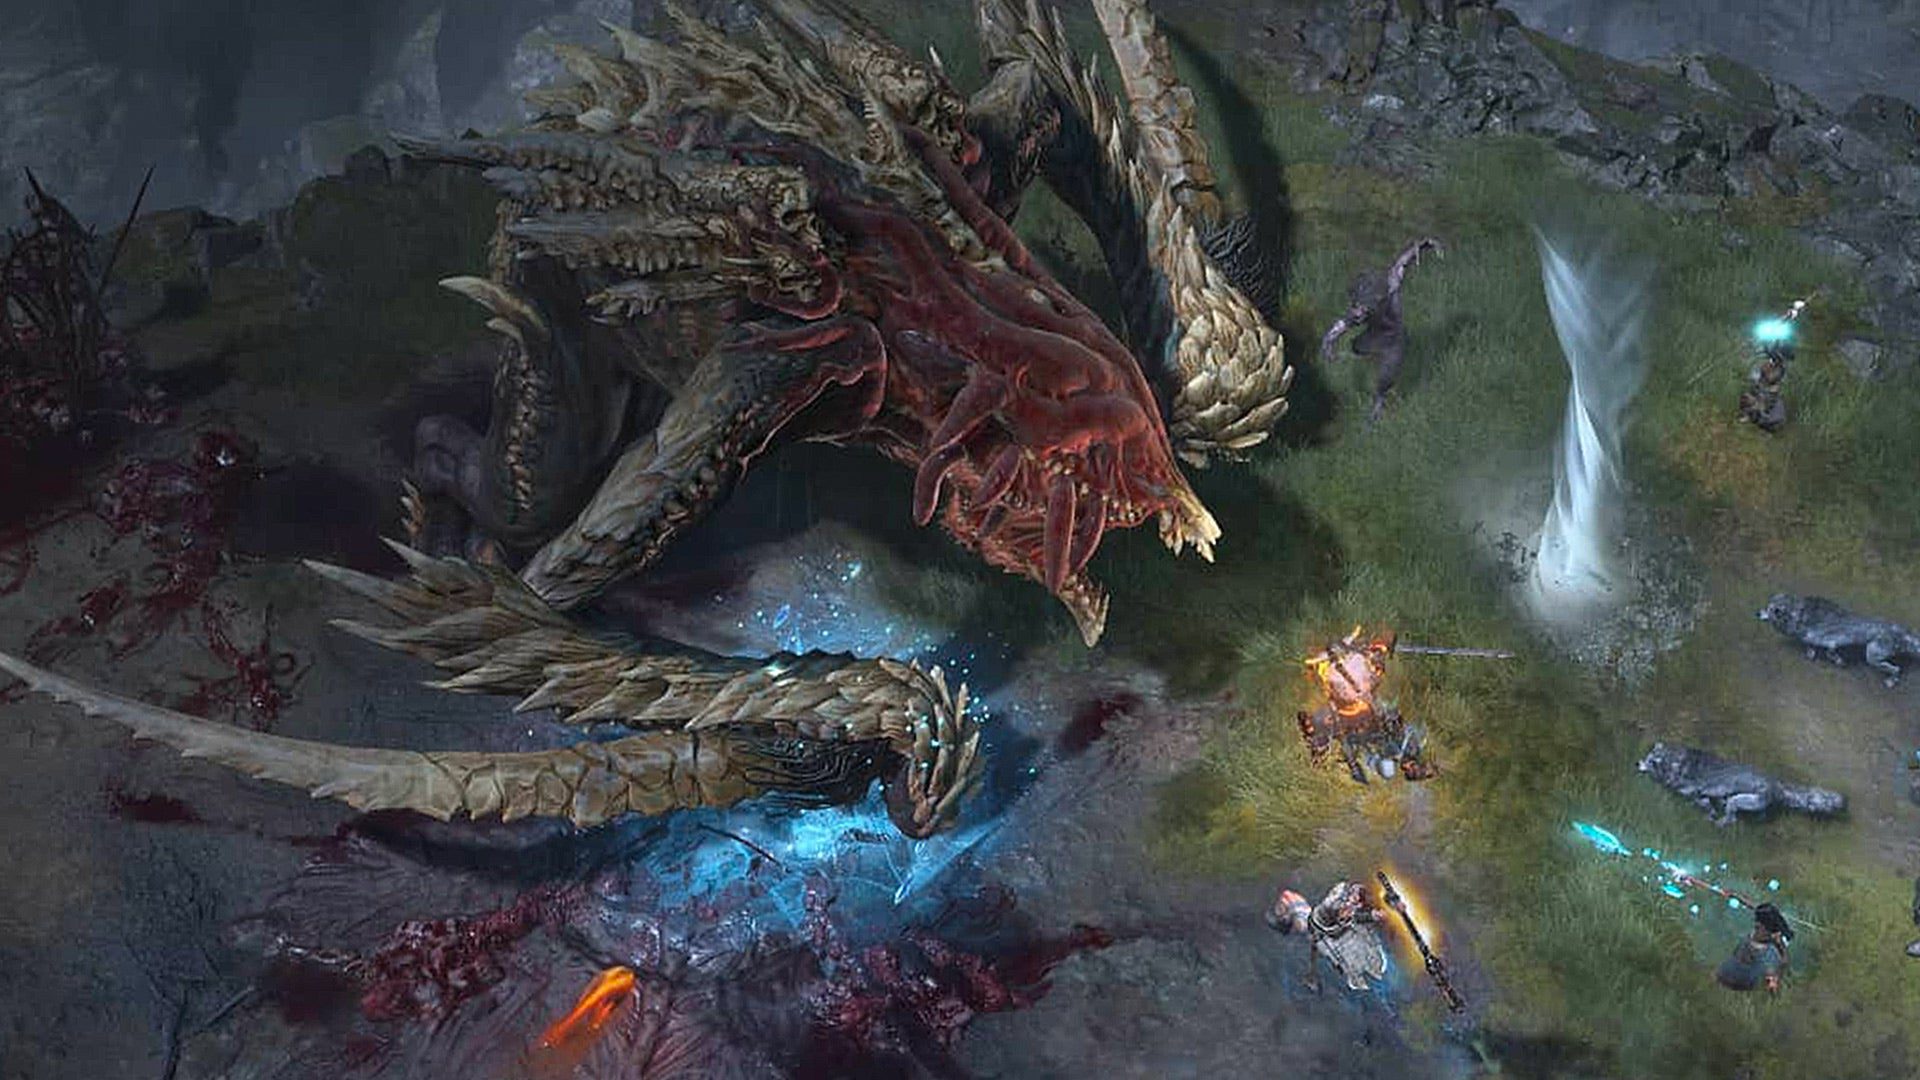 There will also be changes to world events and bosses for Diablo 4